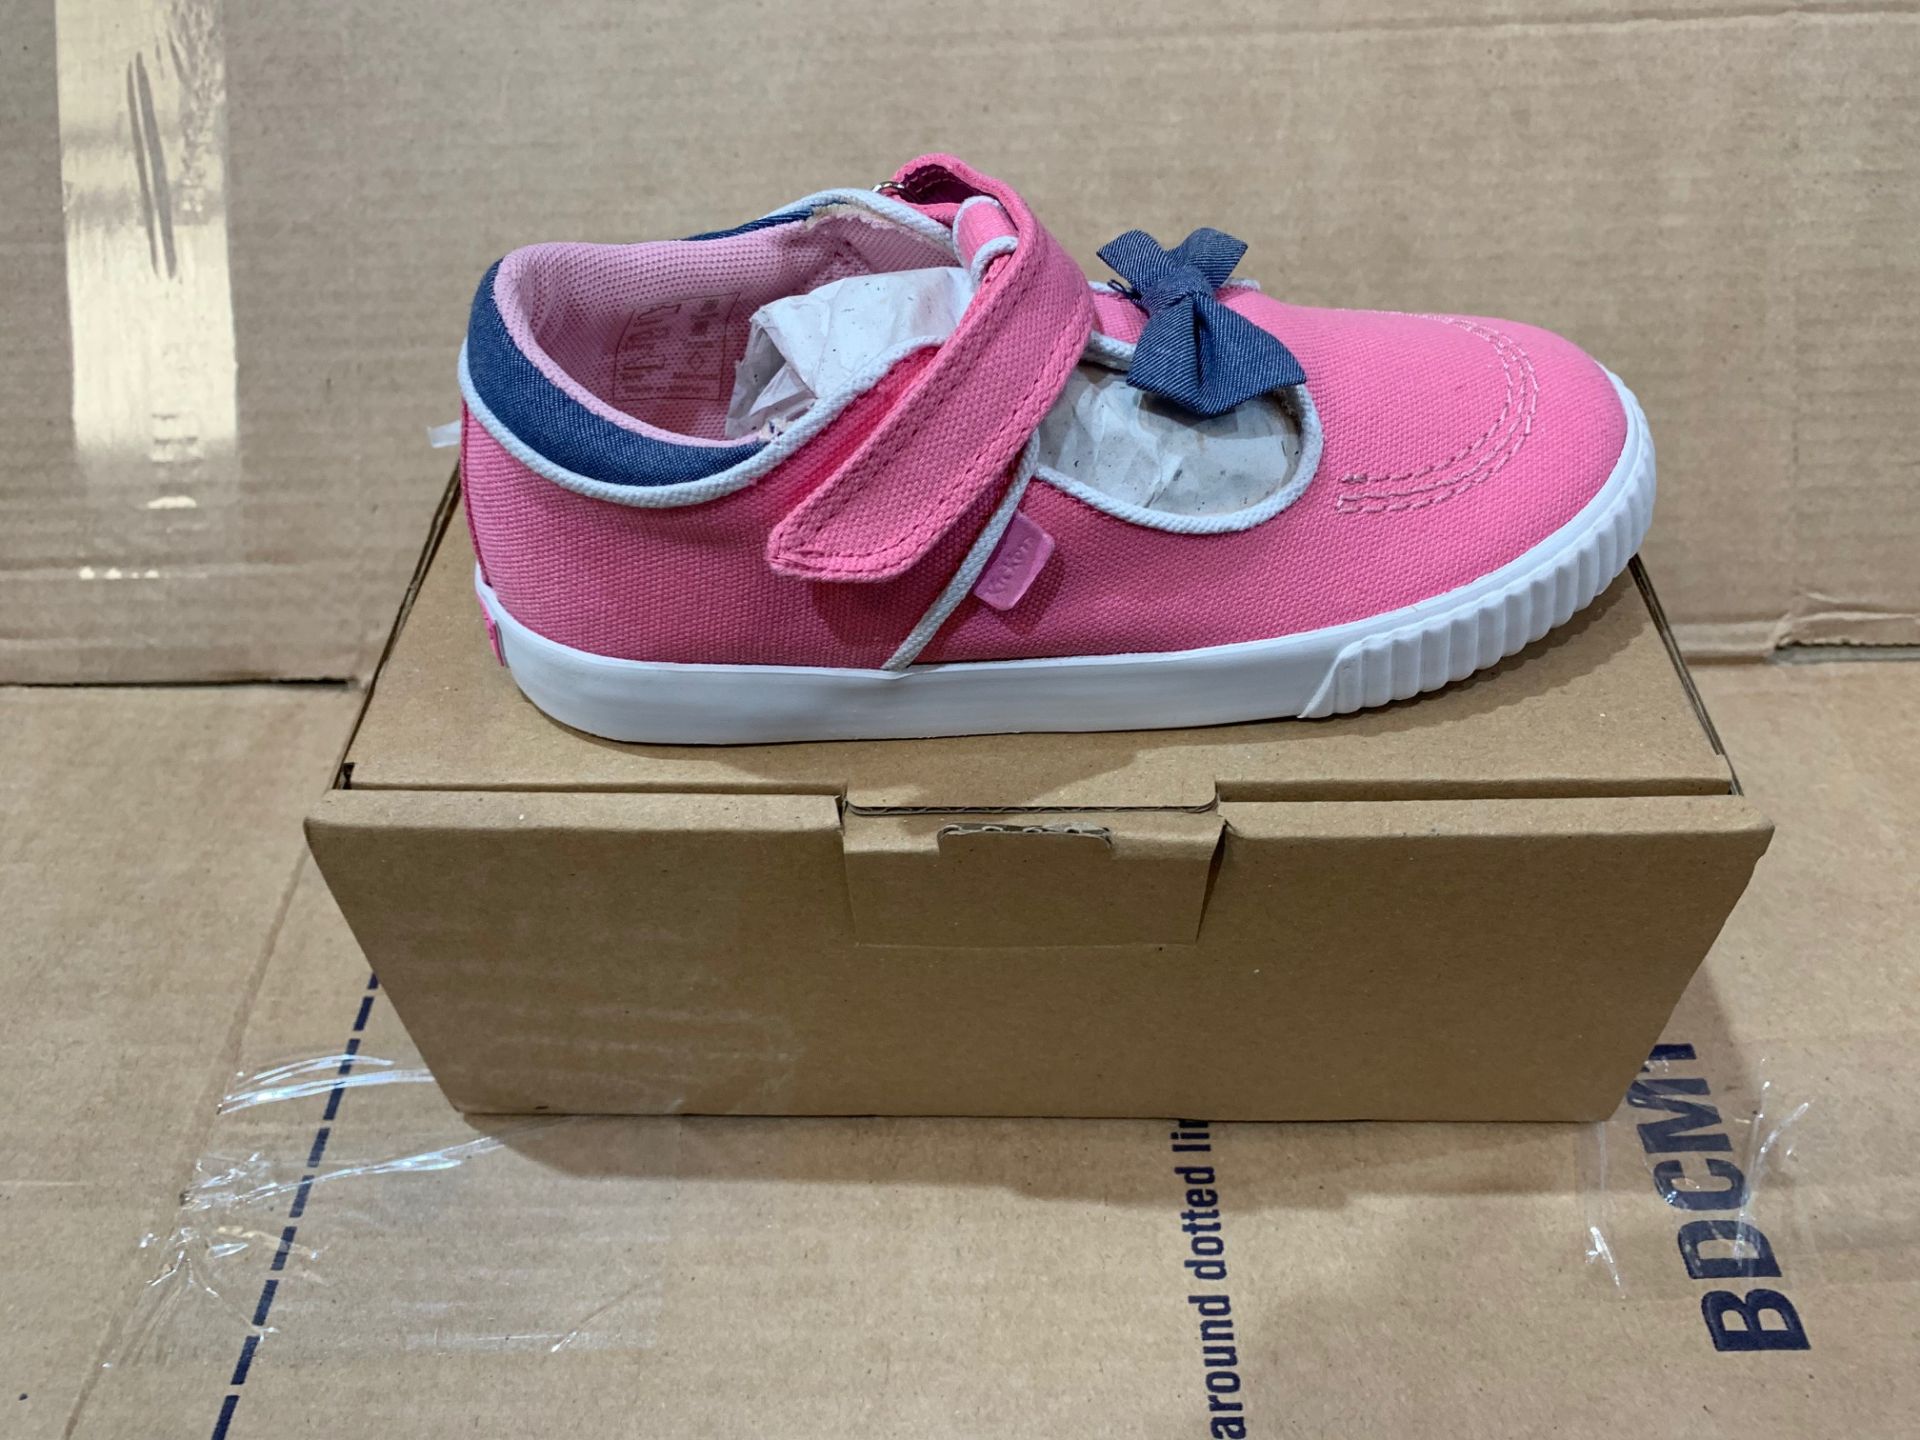 1 X NEW & BOXED KICKERS PUMPS PG674408 SIZE INFANT 12